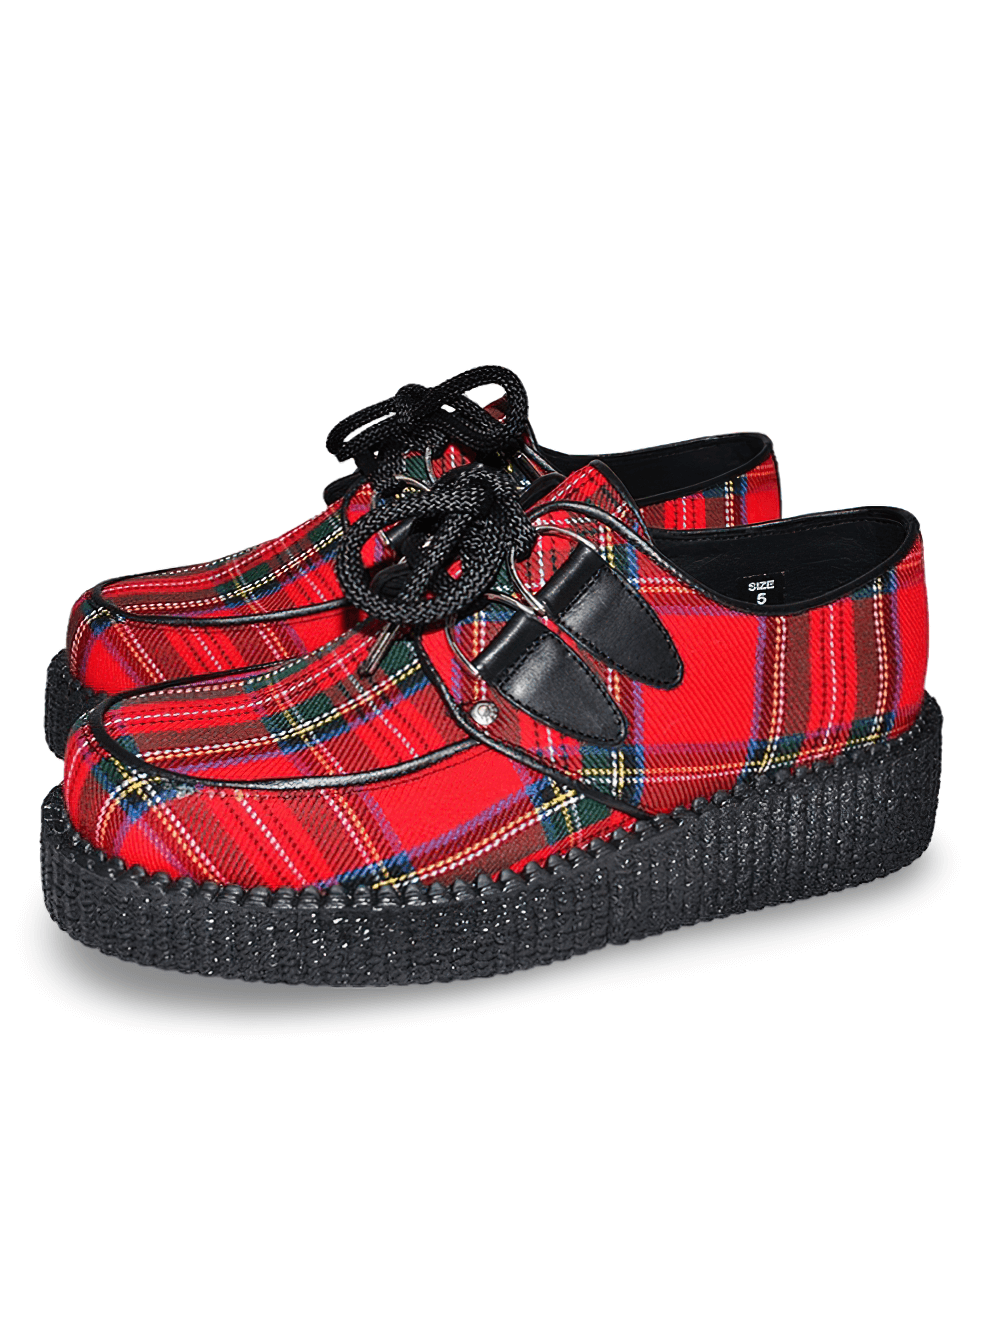 Red Tartan Creepers with Black Accents and Rubber Sole